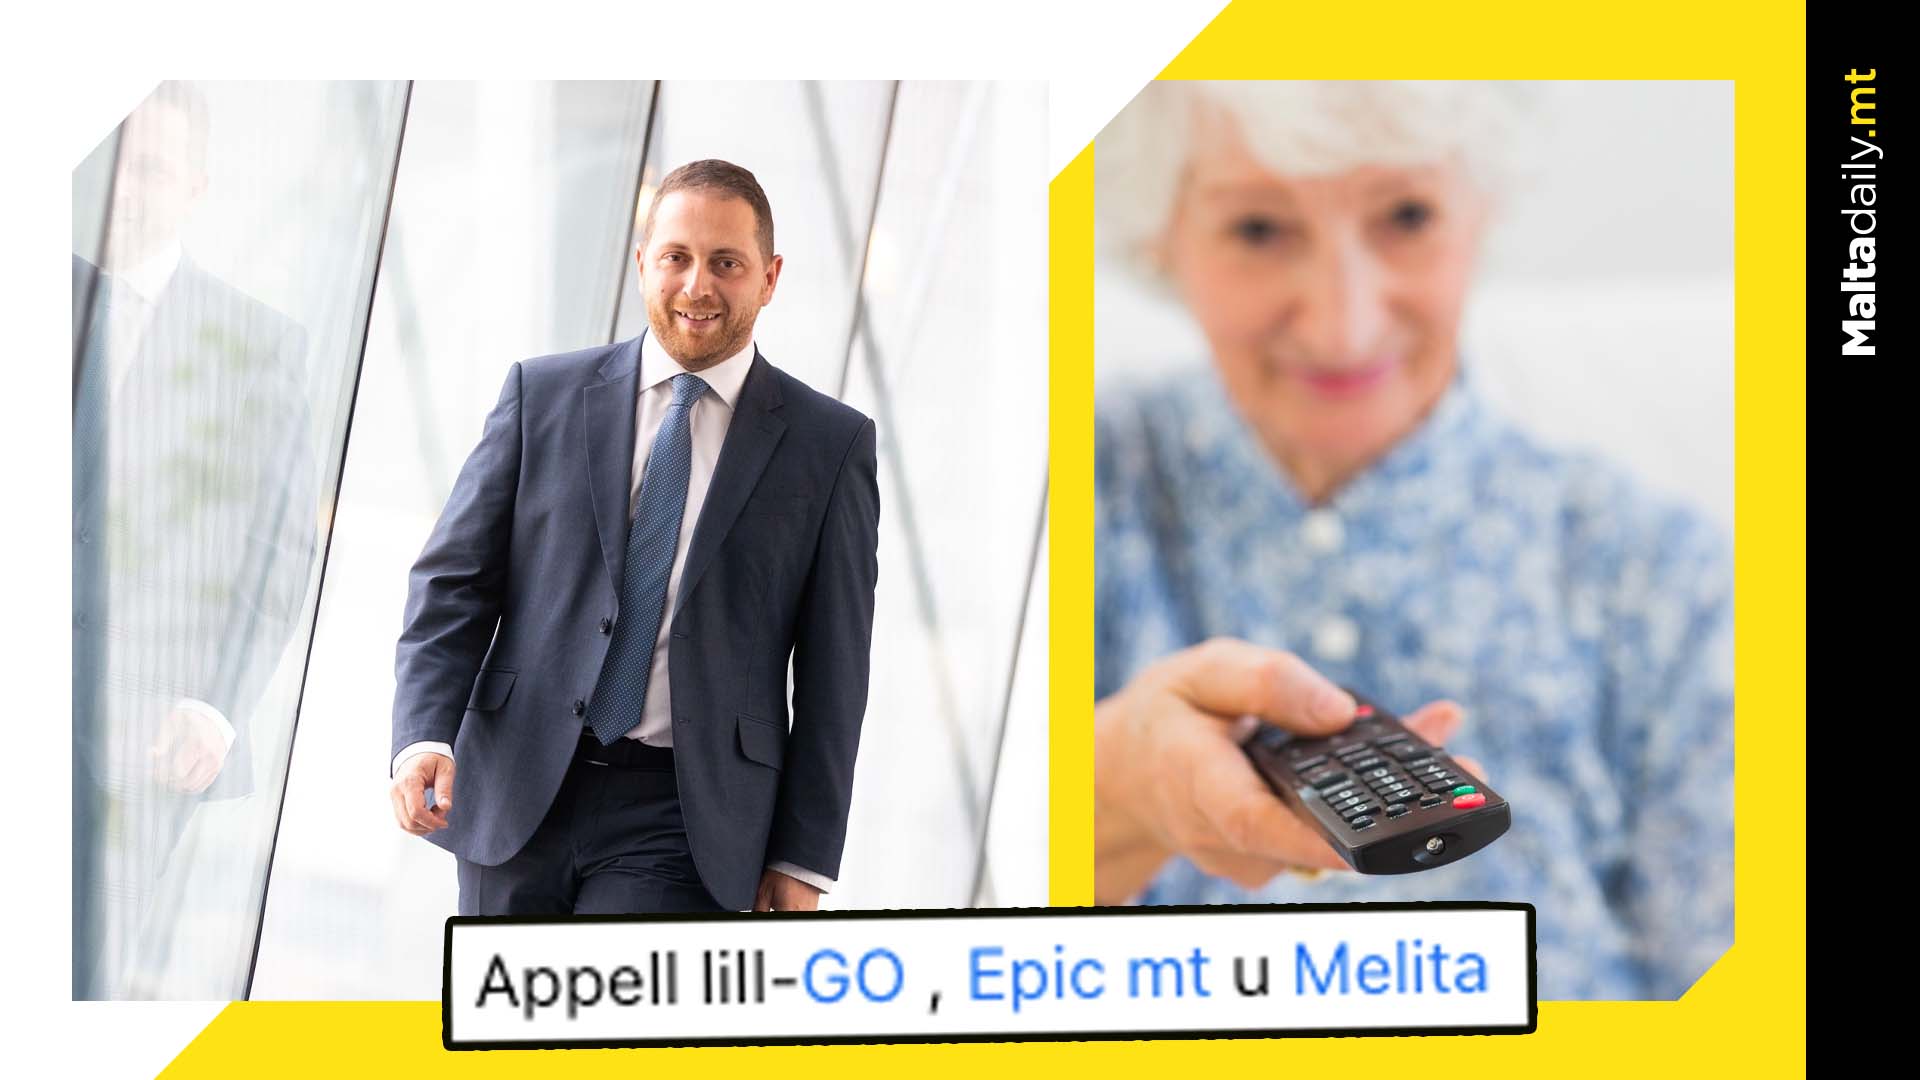 MEP Asks Telecoms Companies To Simplify Navigation For Elderly